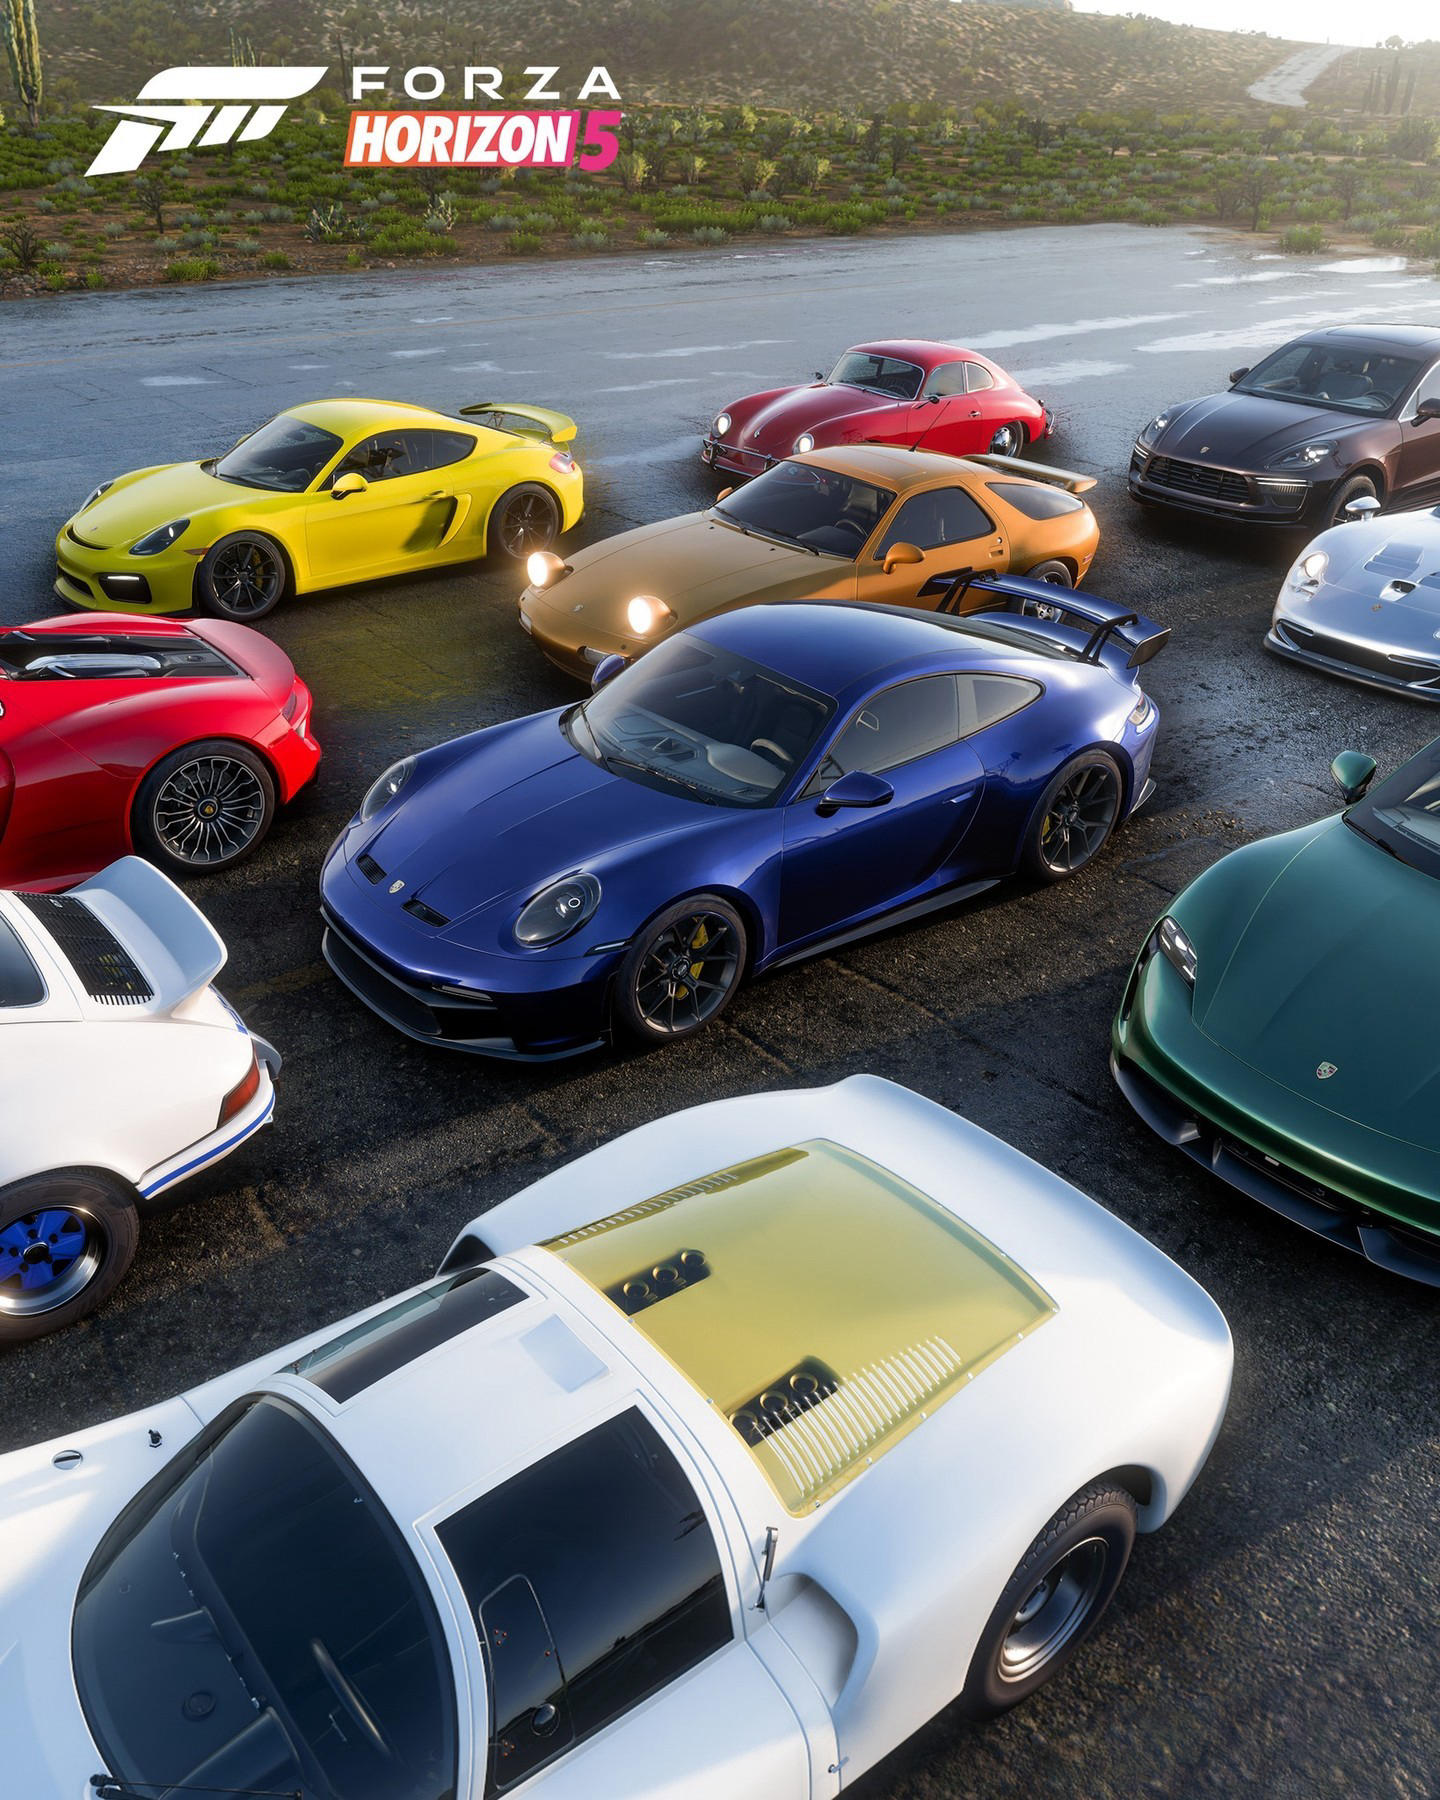 image  1 Porsche - Set in the luscious landscapes of Mexico, the latest #forzahorizonofficial is packed full